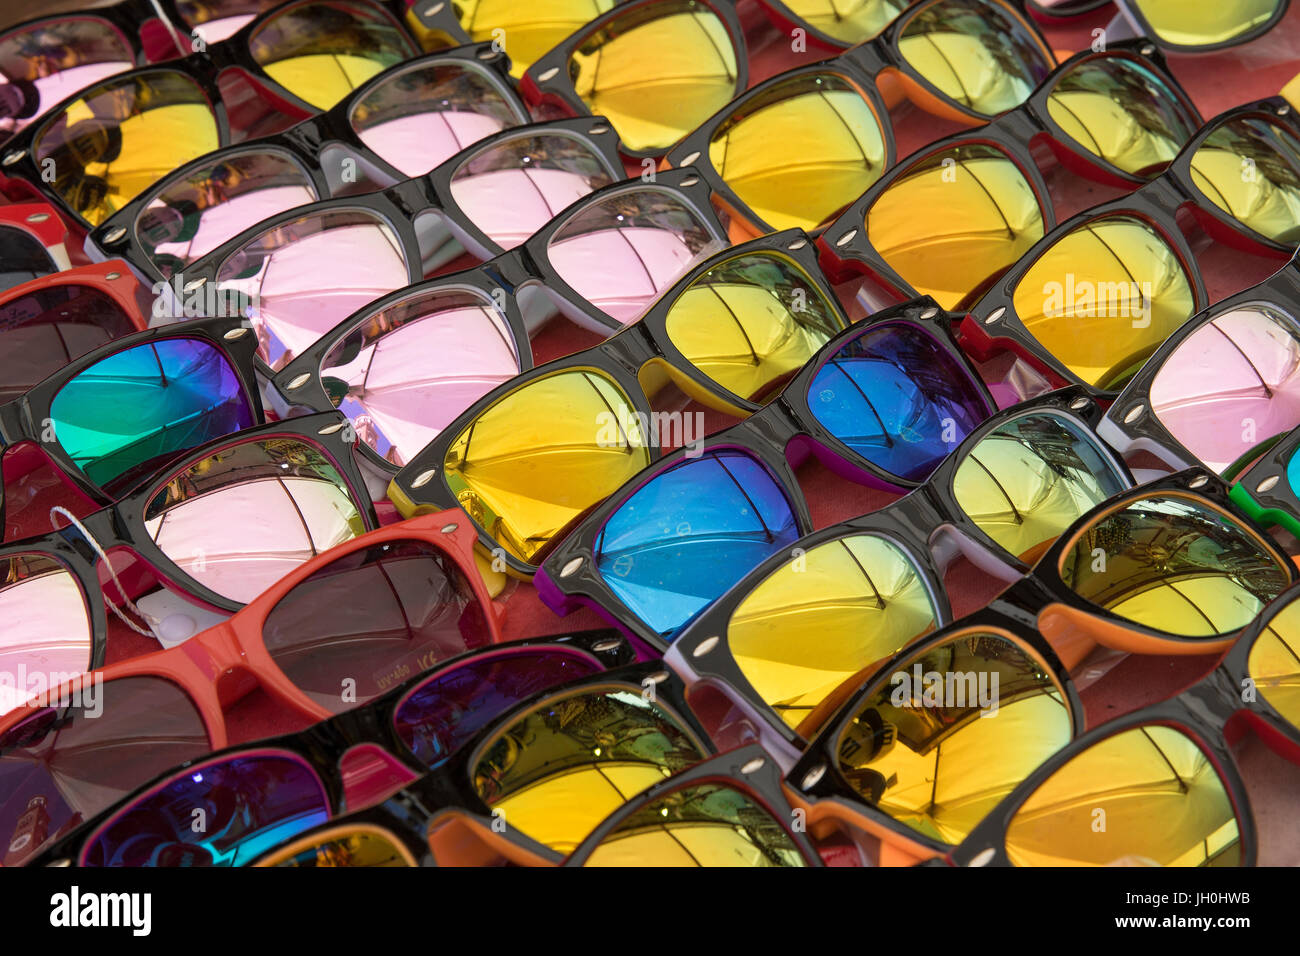 A stall with sunglasses Stock Photo